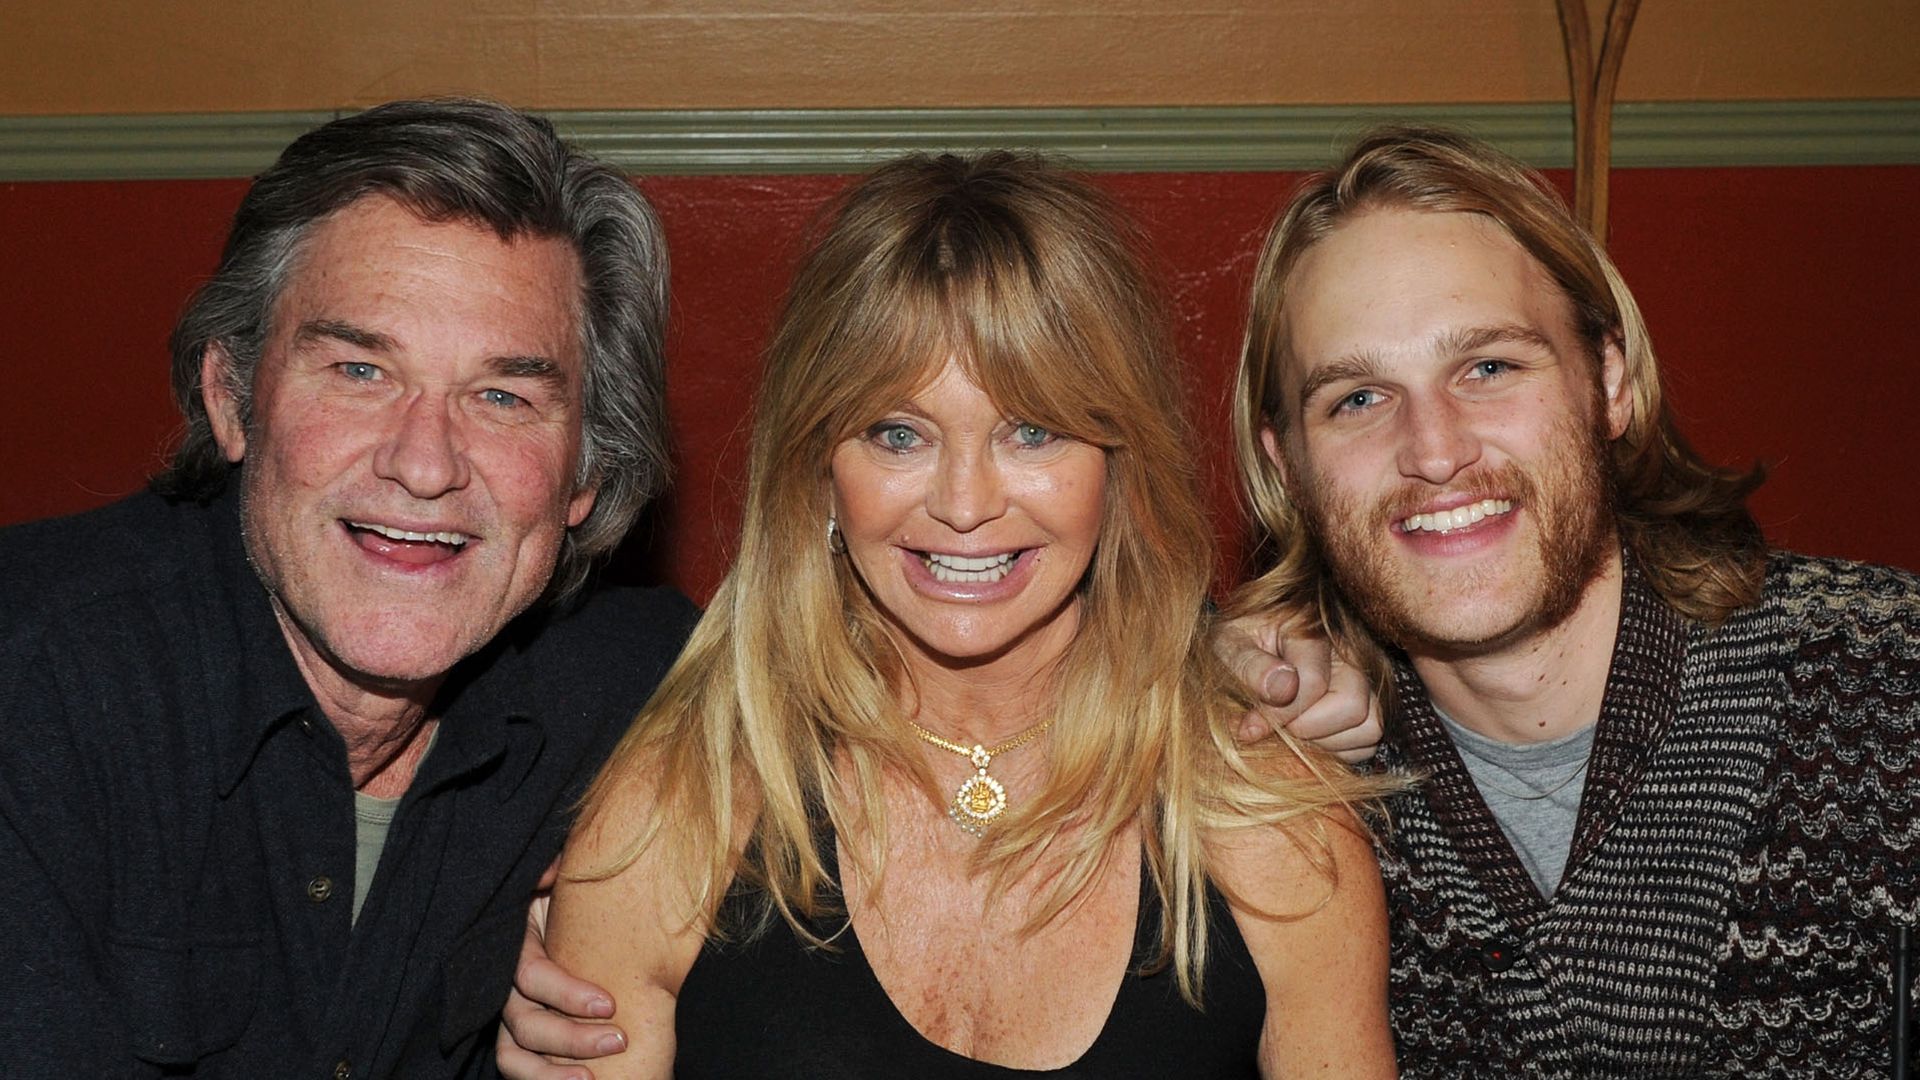 Kurt Russell and son Wyatt Russell receive good news as they prepare for big move together once again